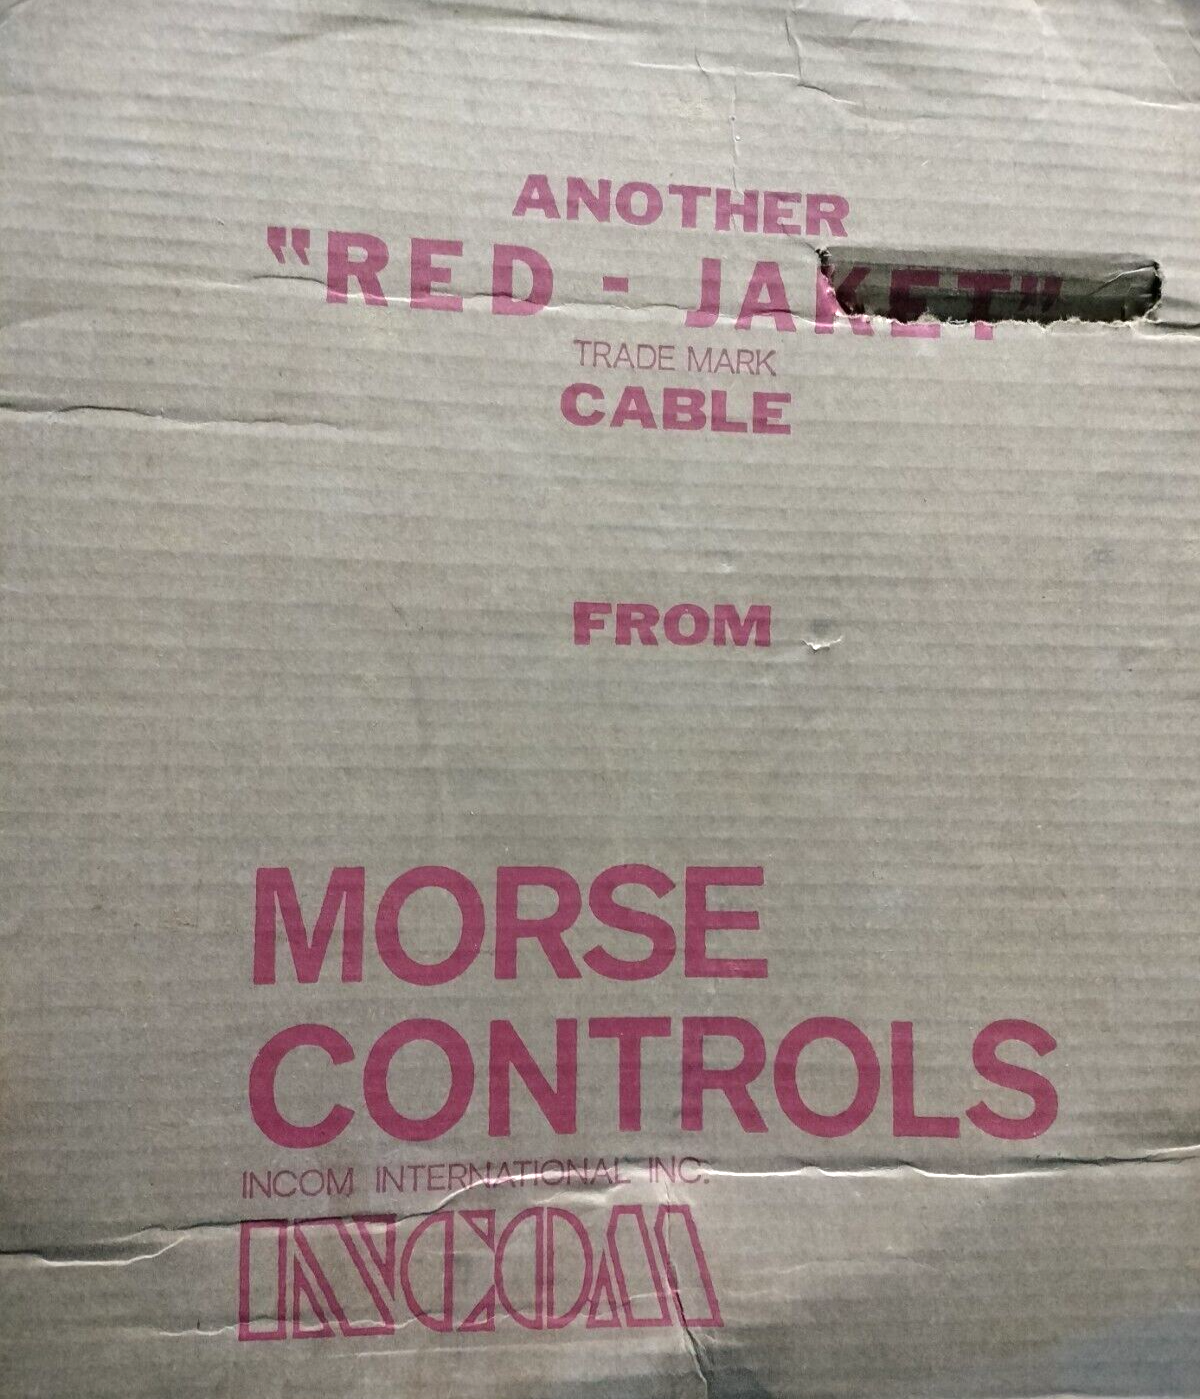 D32377-003 / MORSE RED JACKET CONTROL CABLE-  276 INCHES / 23 ft.  NEW IN BOX